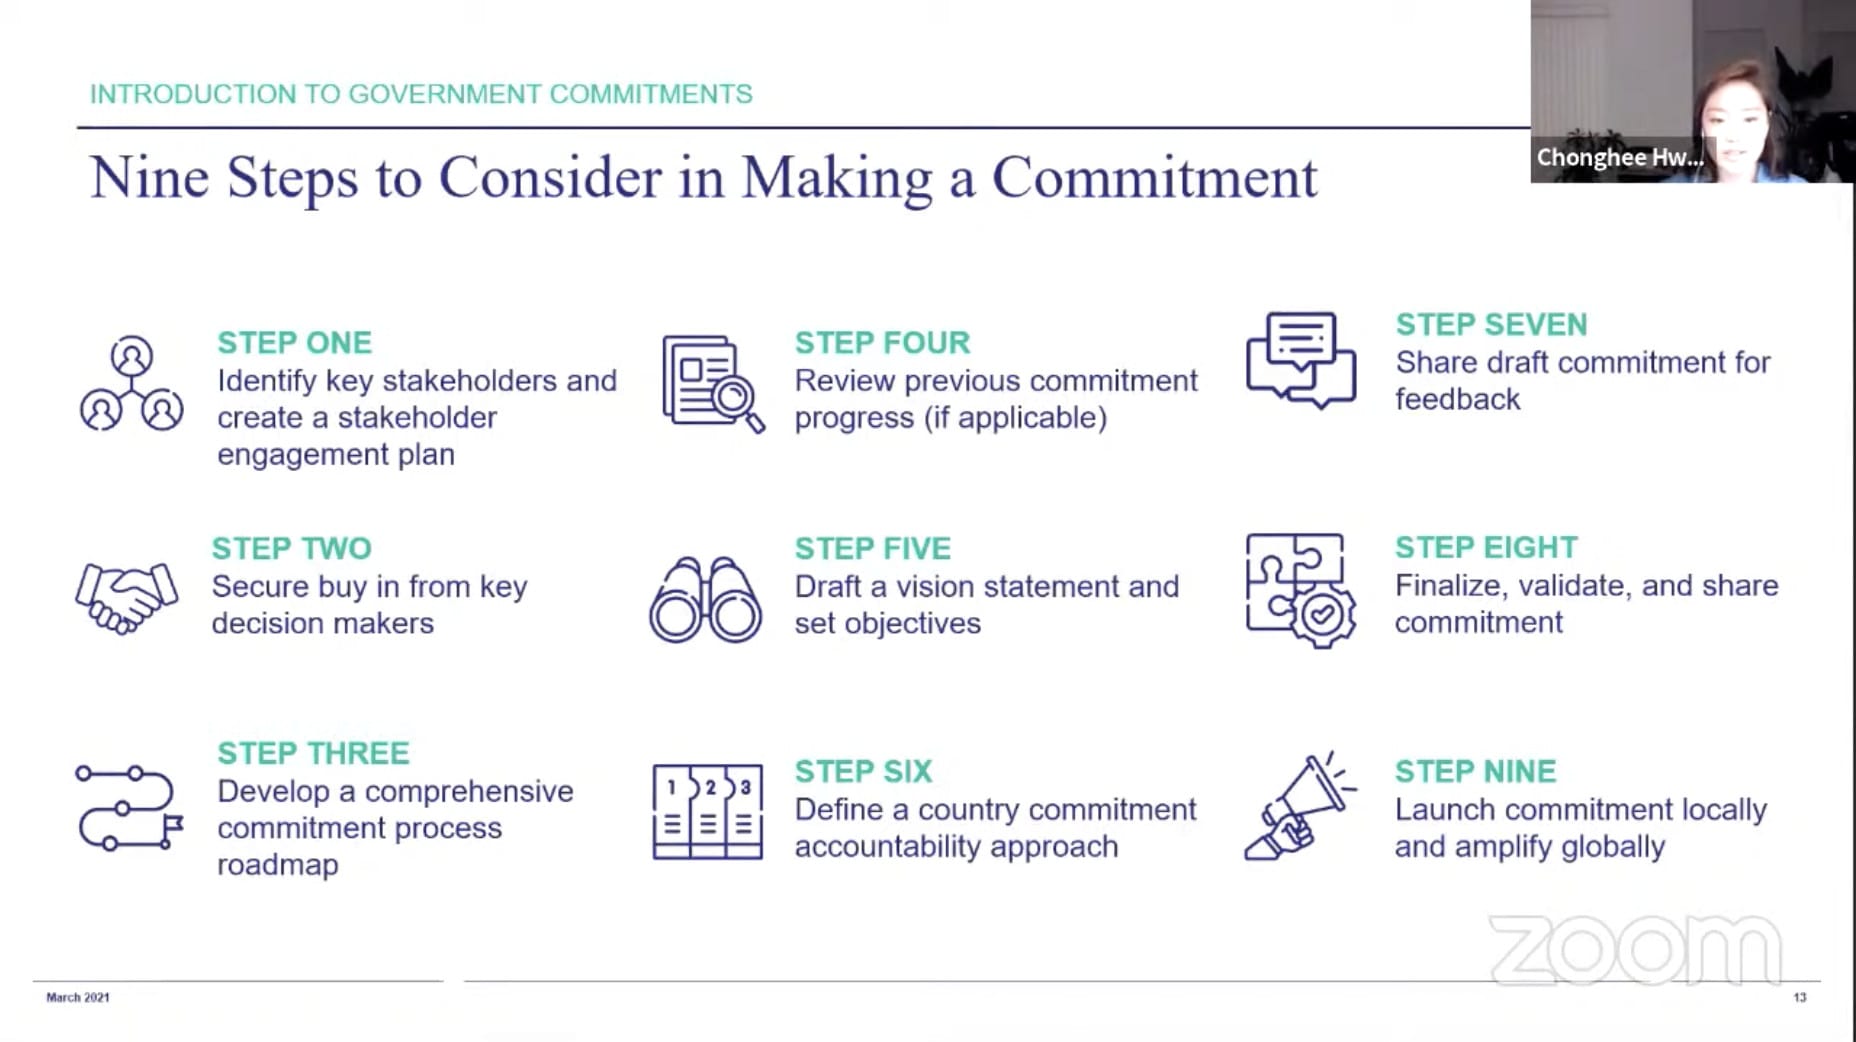 Chonghee Hwang speaks about the nine steps for governments to consider during the “Introduction to FP2030 Commitments” webinar